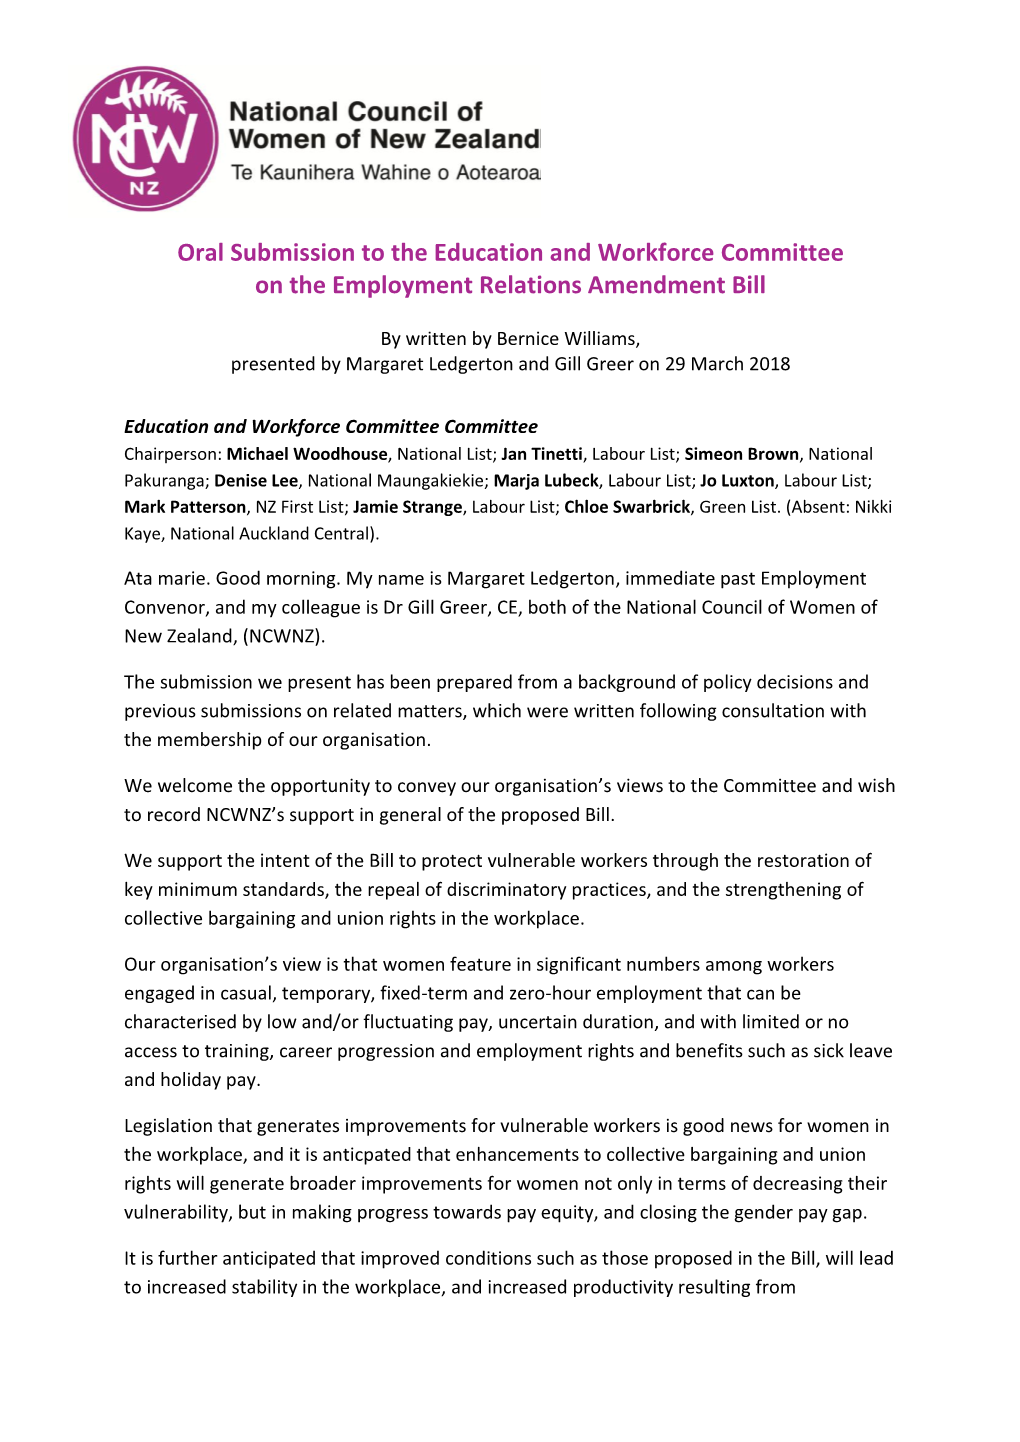 Oral Submission to the Education and Workforce Committee on the Employment Relations Amendment Bill